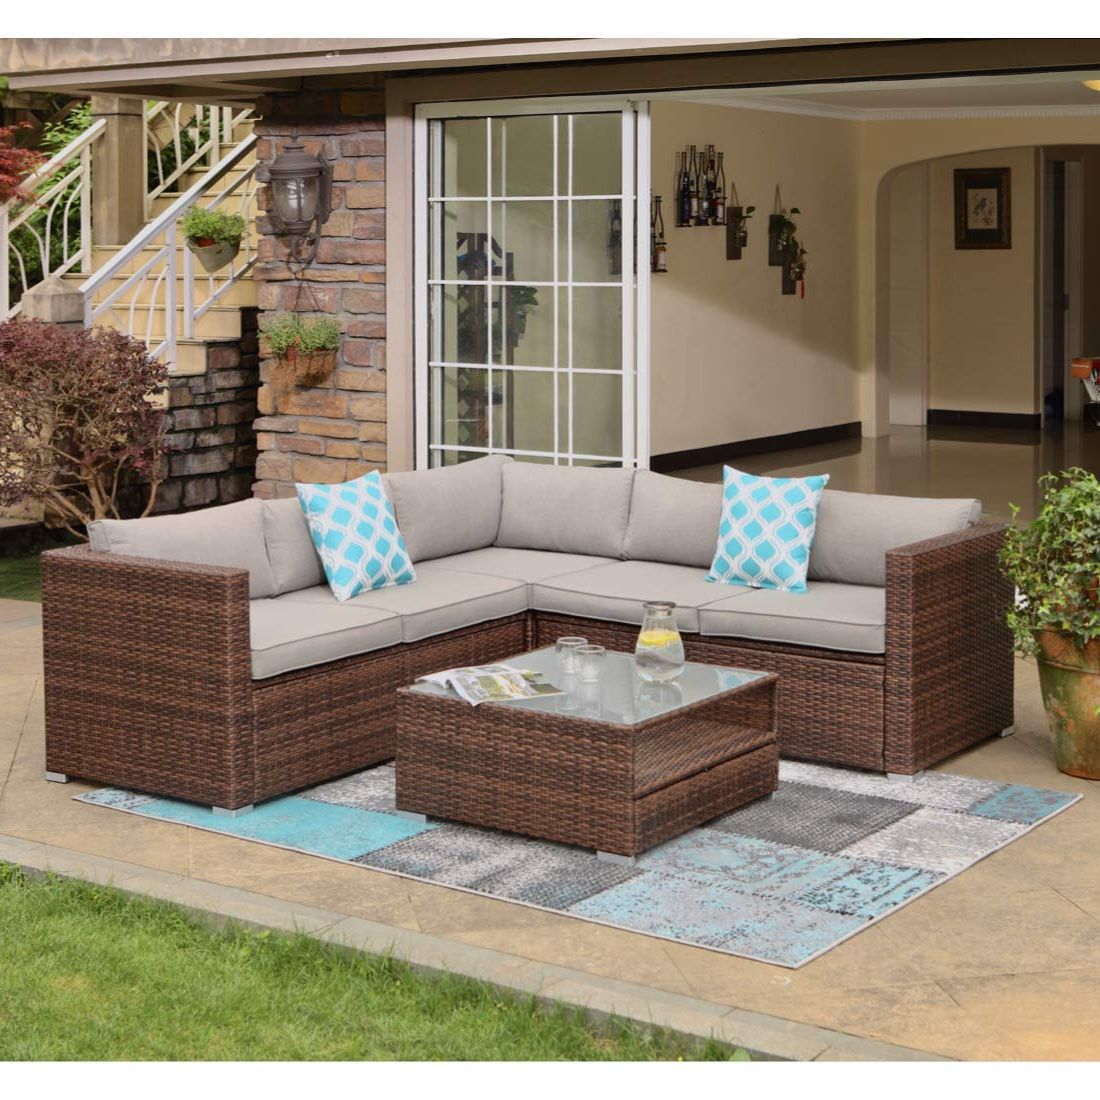 Favorite Amazon: Cosiest 4 Piece Outdoor Furniture Set All Weather Brown Wicker  Sectional Sofa W Warm Gray Thick Cushions, Glass Coffee Table, 2 Teal  Pattern Pillows Incl. Waterproof Cover, Clips : Patio, Lawn & Garden Within 4 Piece Outdoor Wicker Seating Set In Brown (Photo 4 of 15)